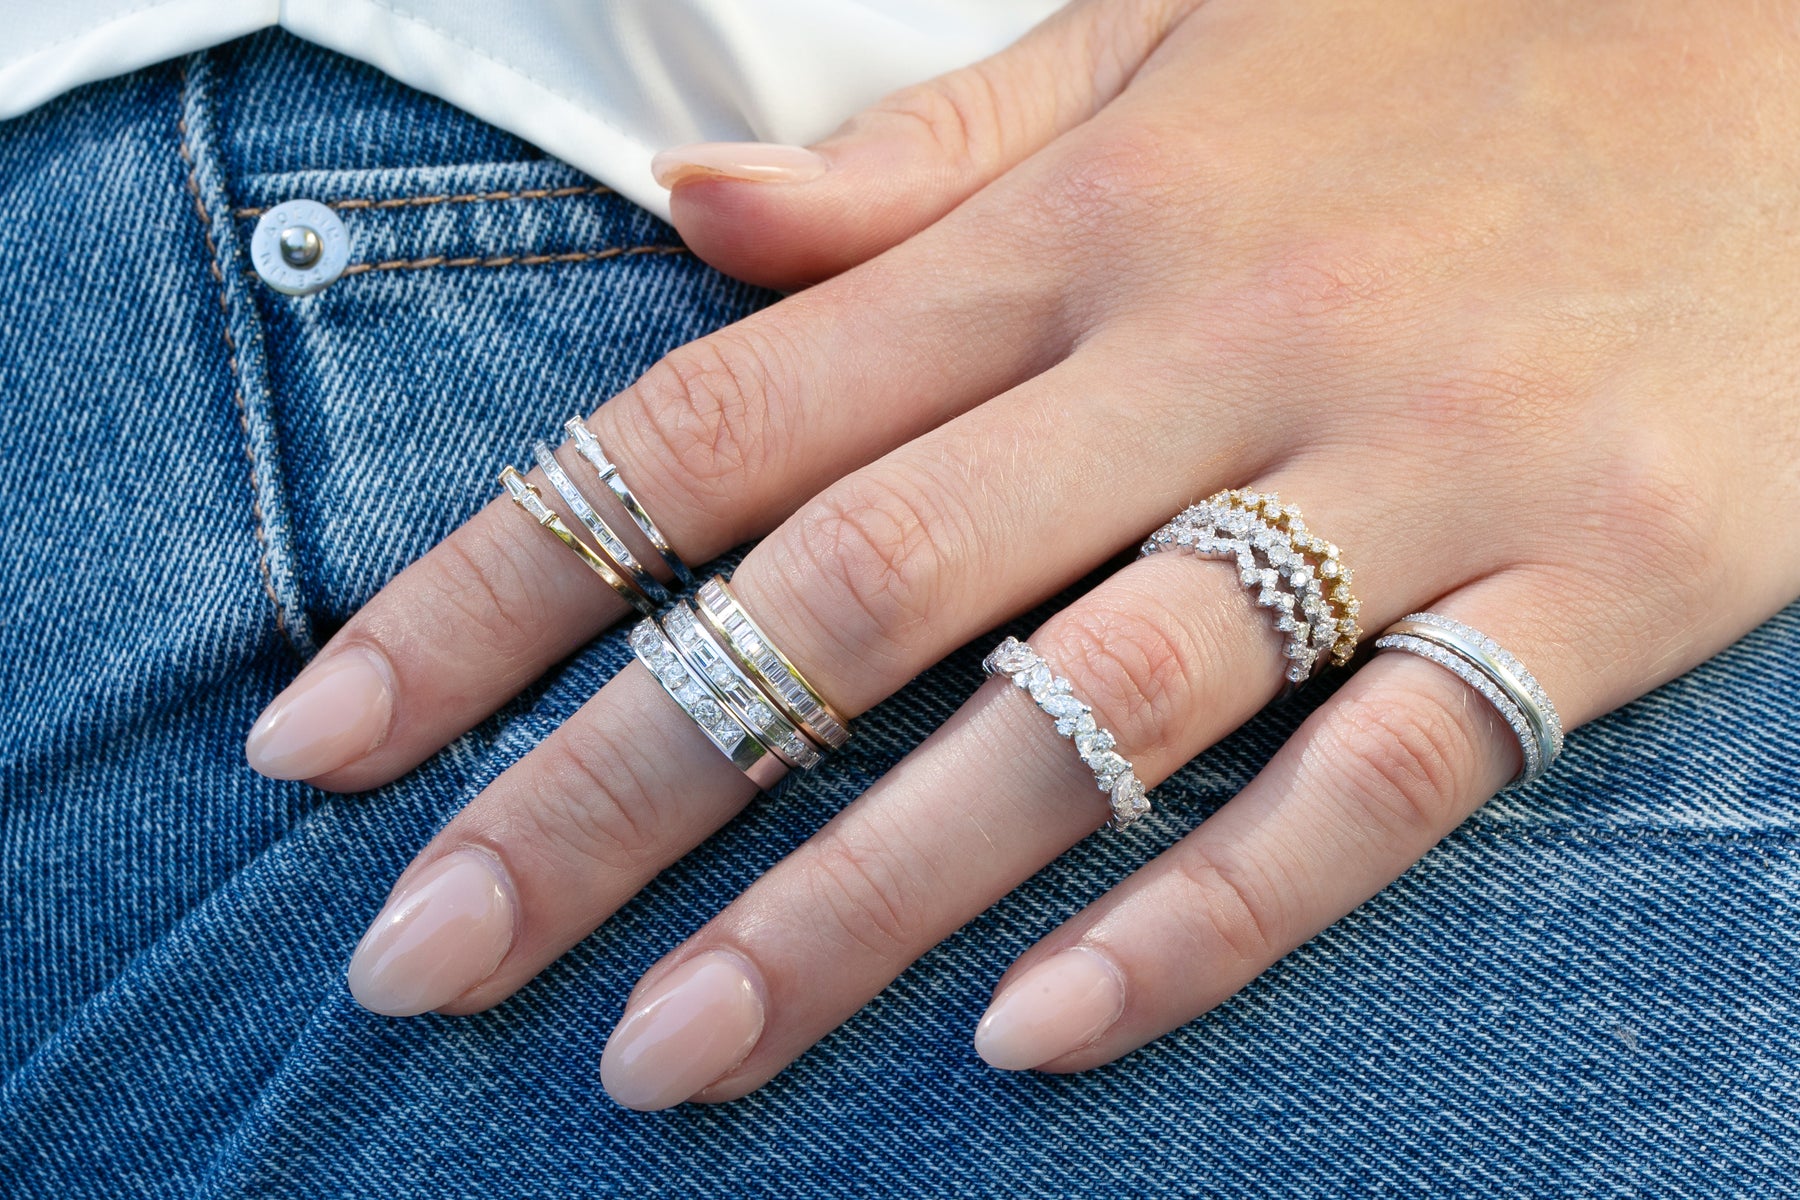 18K Gold Petite Double Baguette Diamond Stacking Band styled in a casual style with multiple other diamond bands layered on model wearing denim jeans. Thomas Laine Jewelry